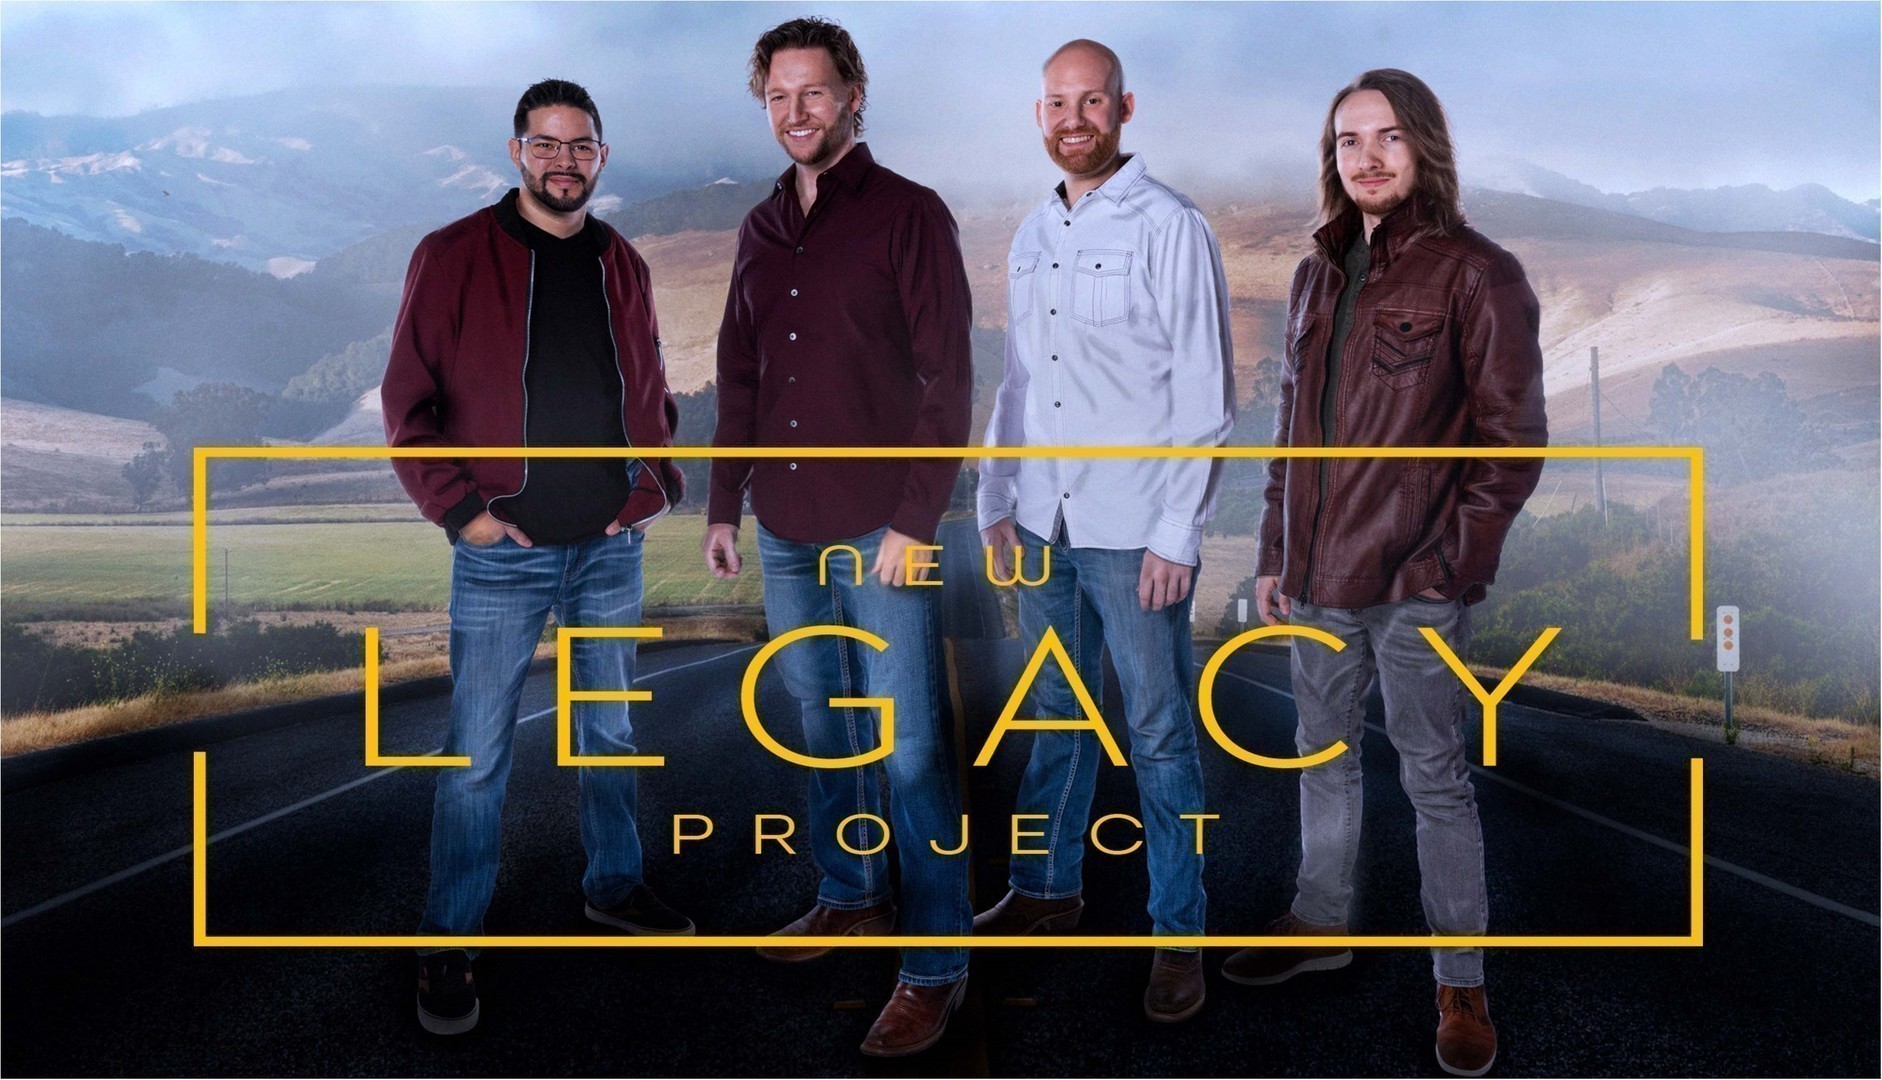 Live NOV 12 Concert in Killeen with Popular Nashville-based Men's Vocal Band, NEW LEGACY PROJECT, Killeen, Texas, United States